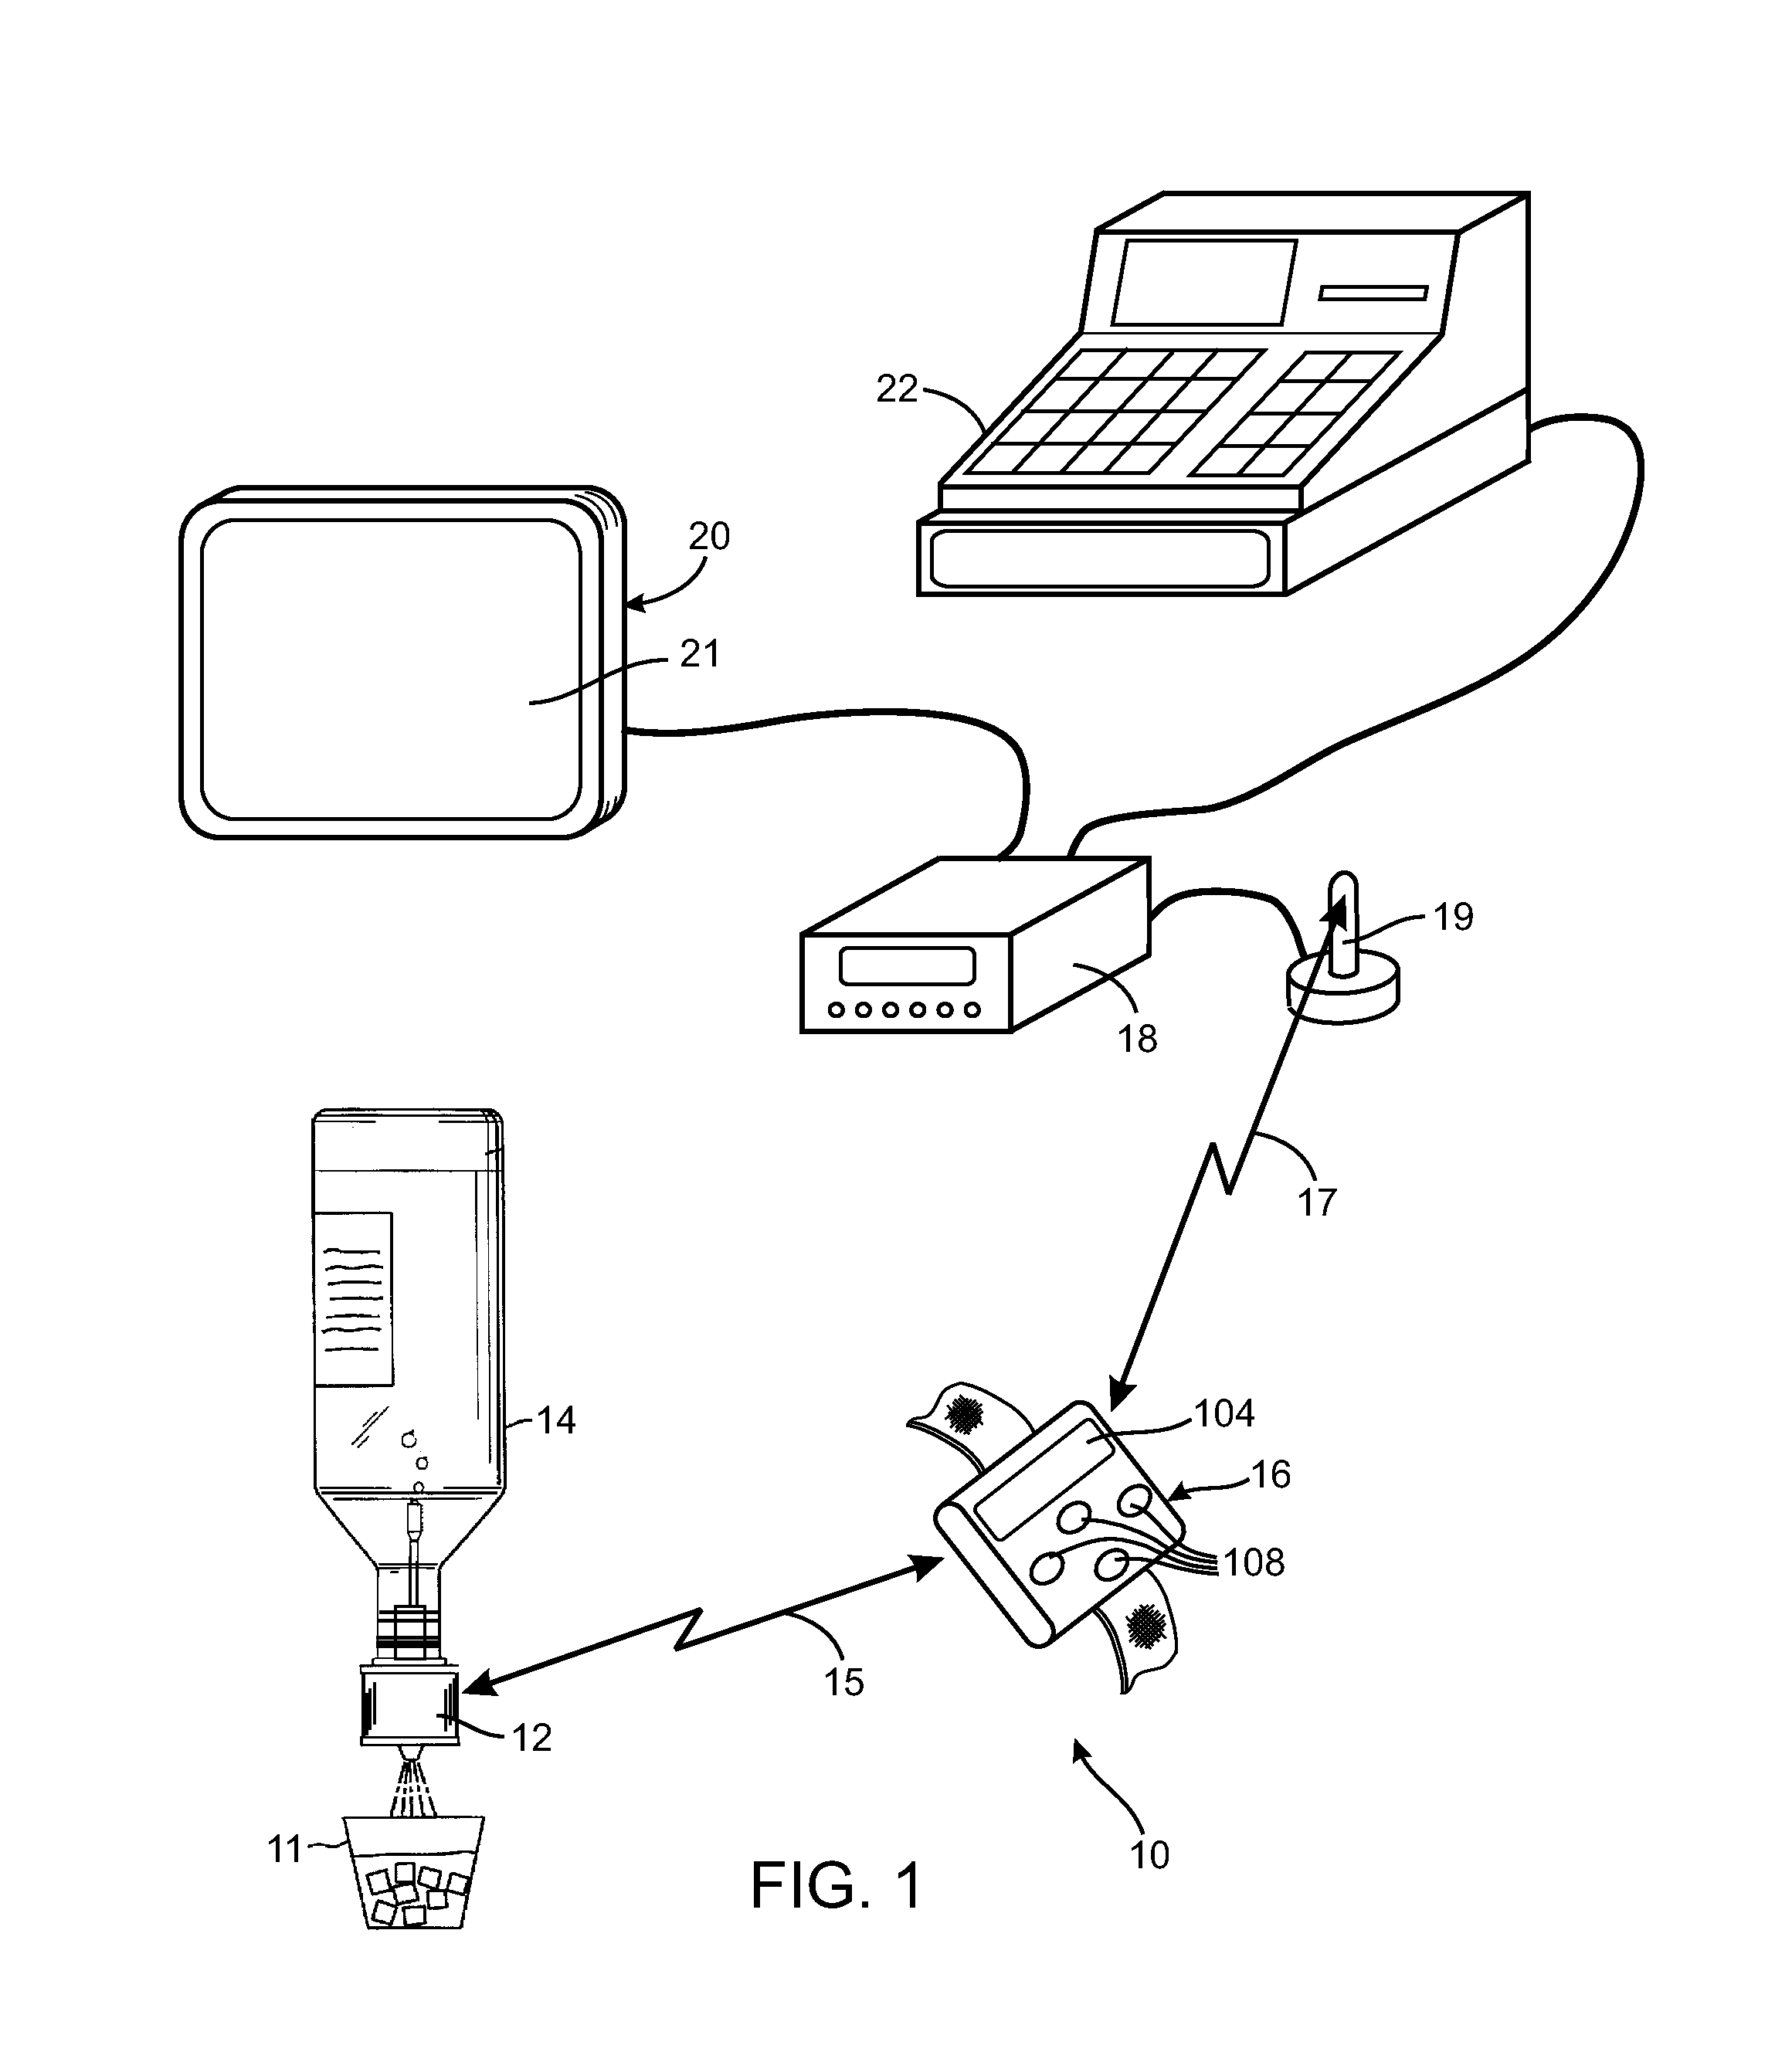 Wireless control system for dispensing beverages from a bottle